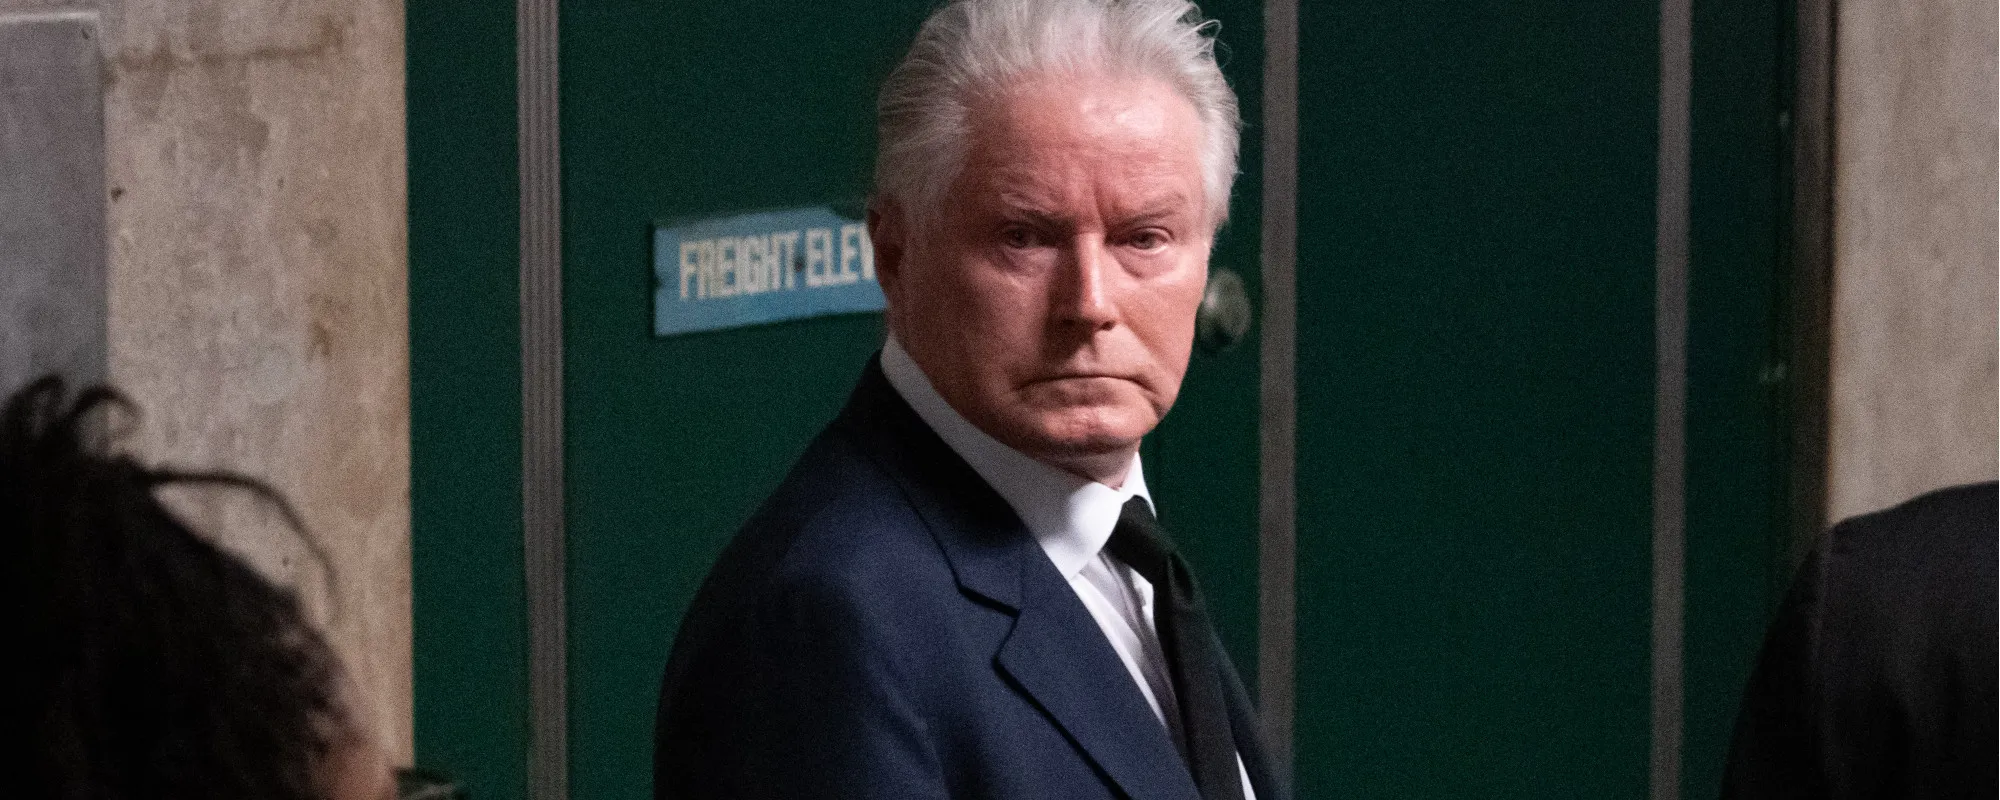 The Eagles Don Henley Questioned in Court Over 1980 Arrest